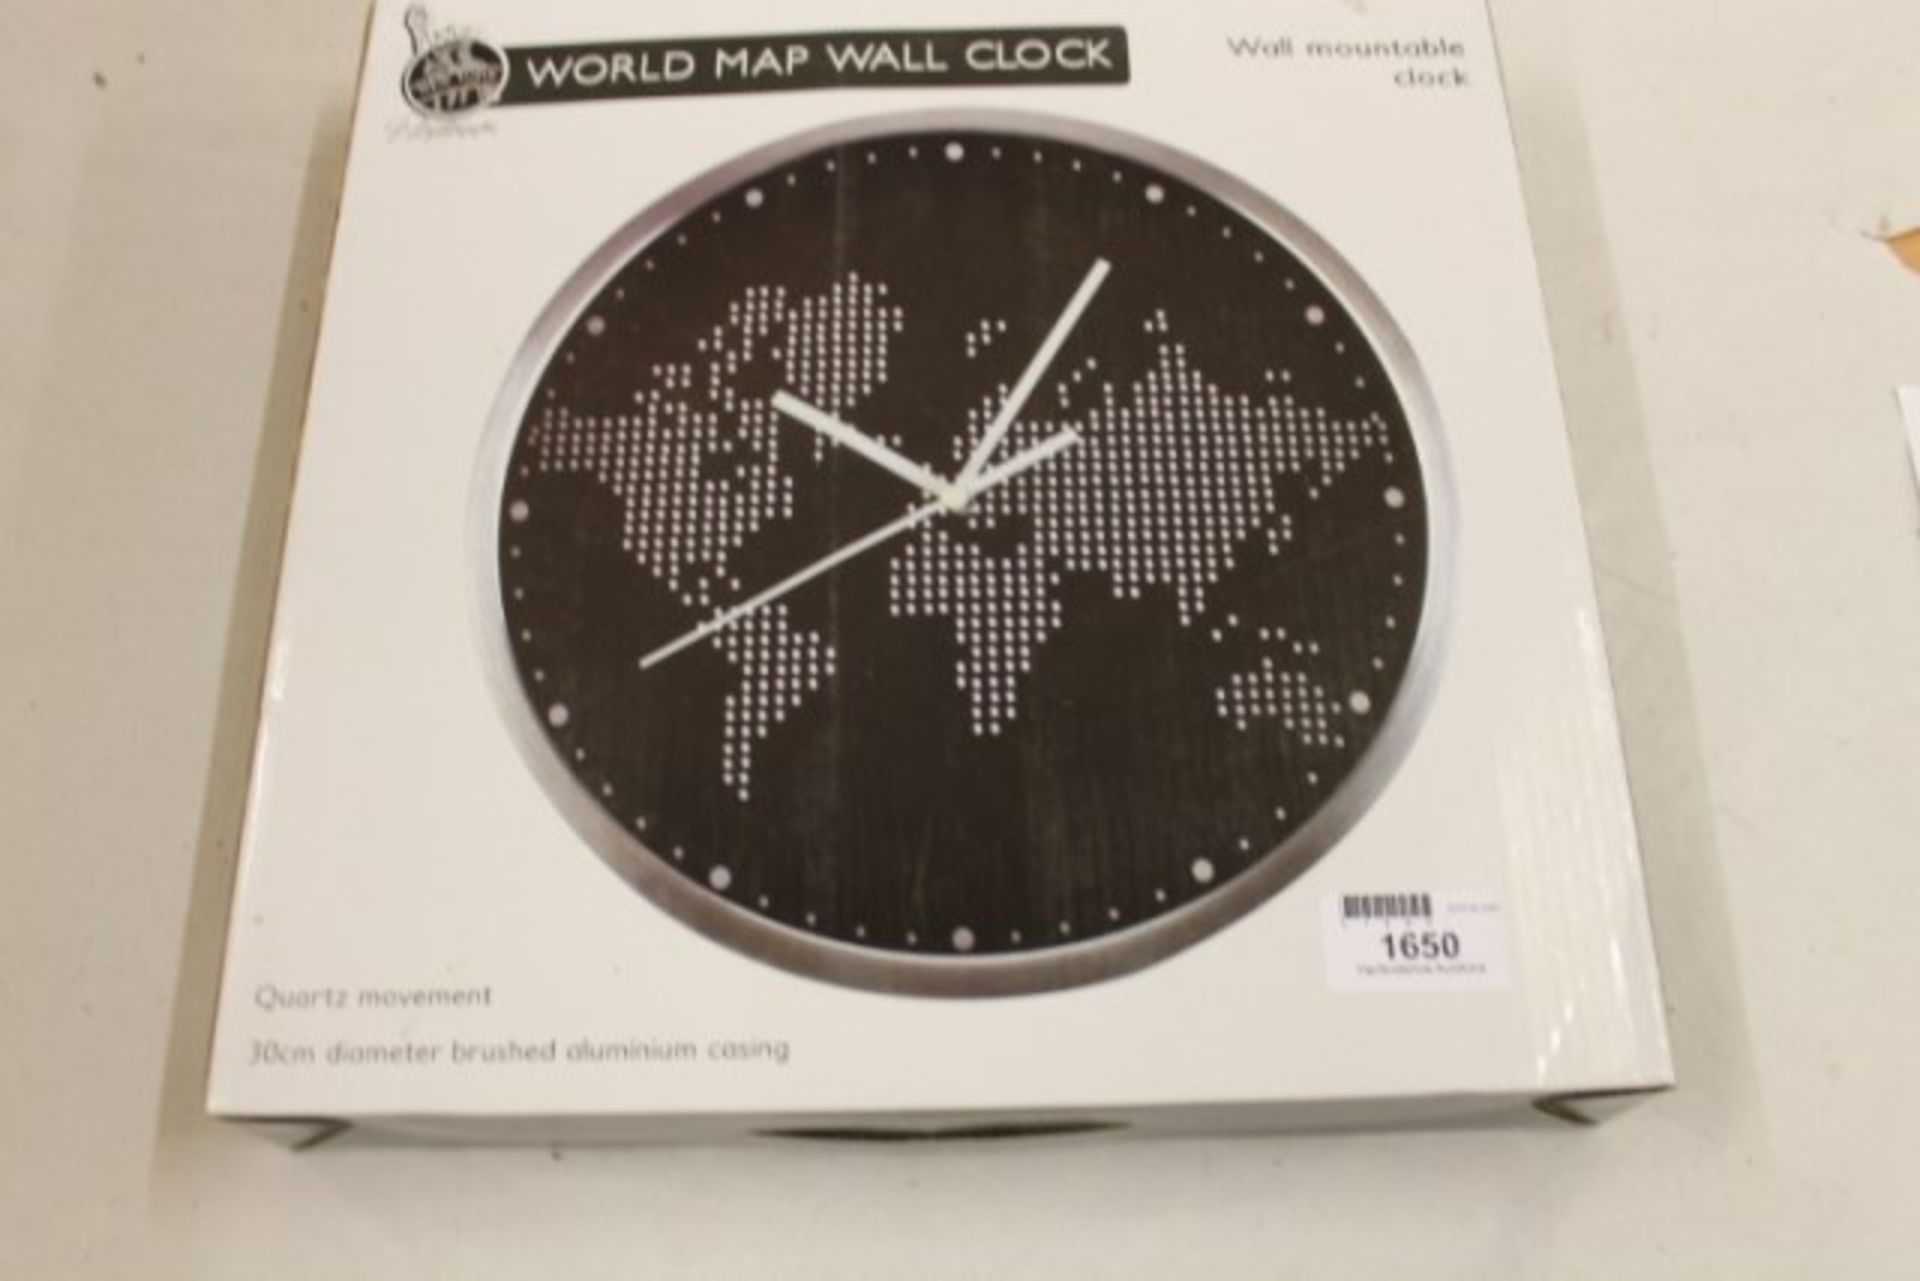 V *TRADE QTY* Grade A Brushed Aluminium Cased 30cm World Map Wall Clock RRP39.99 X 60 YOUR BID PRICE